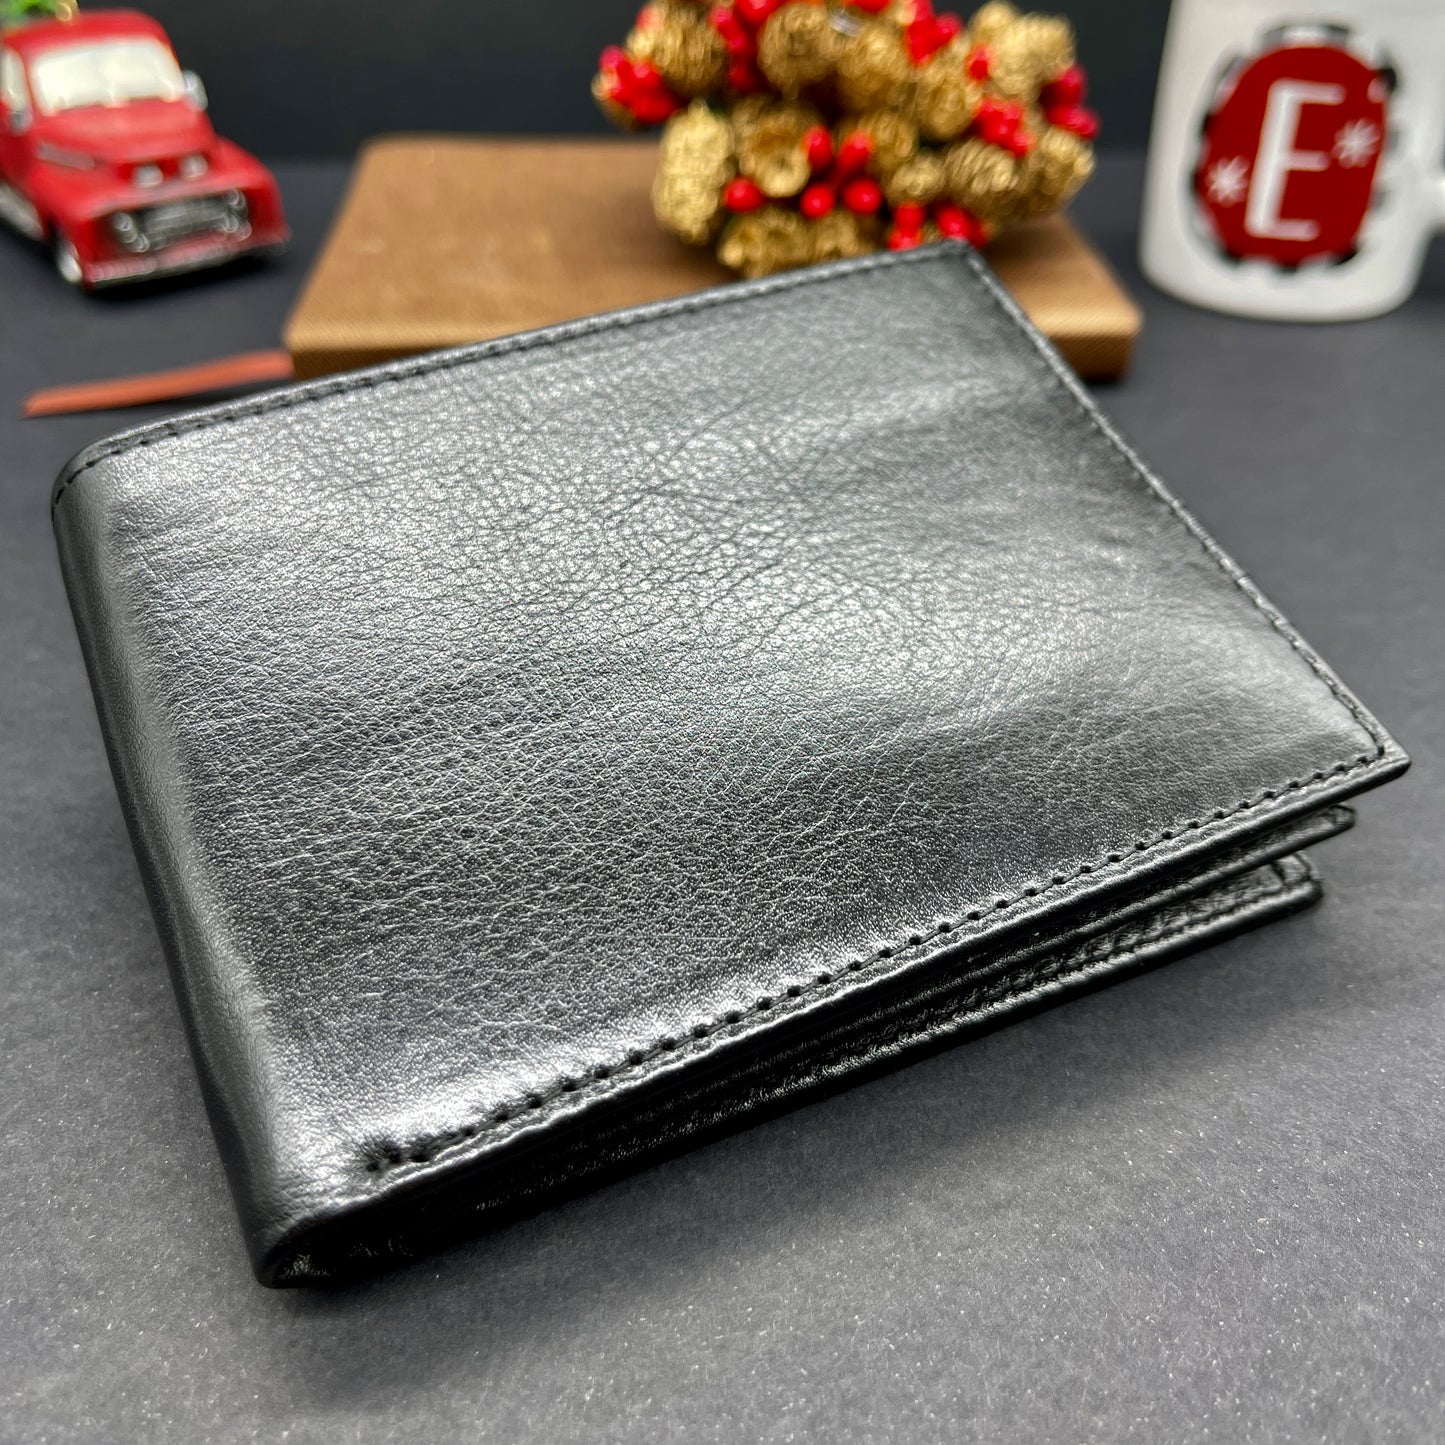 Black Handmade Leather Wallet w/o Coin Pocket